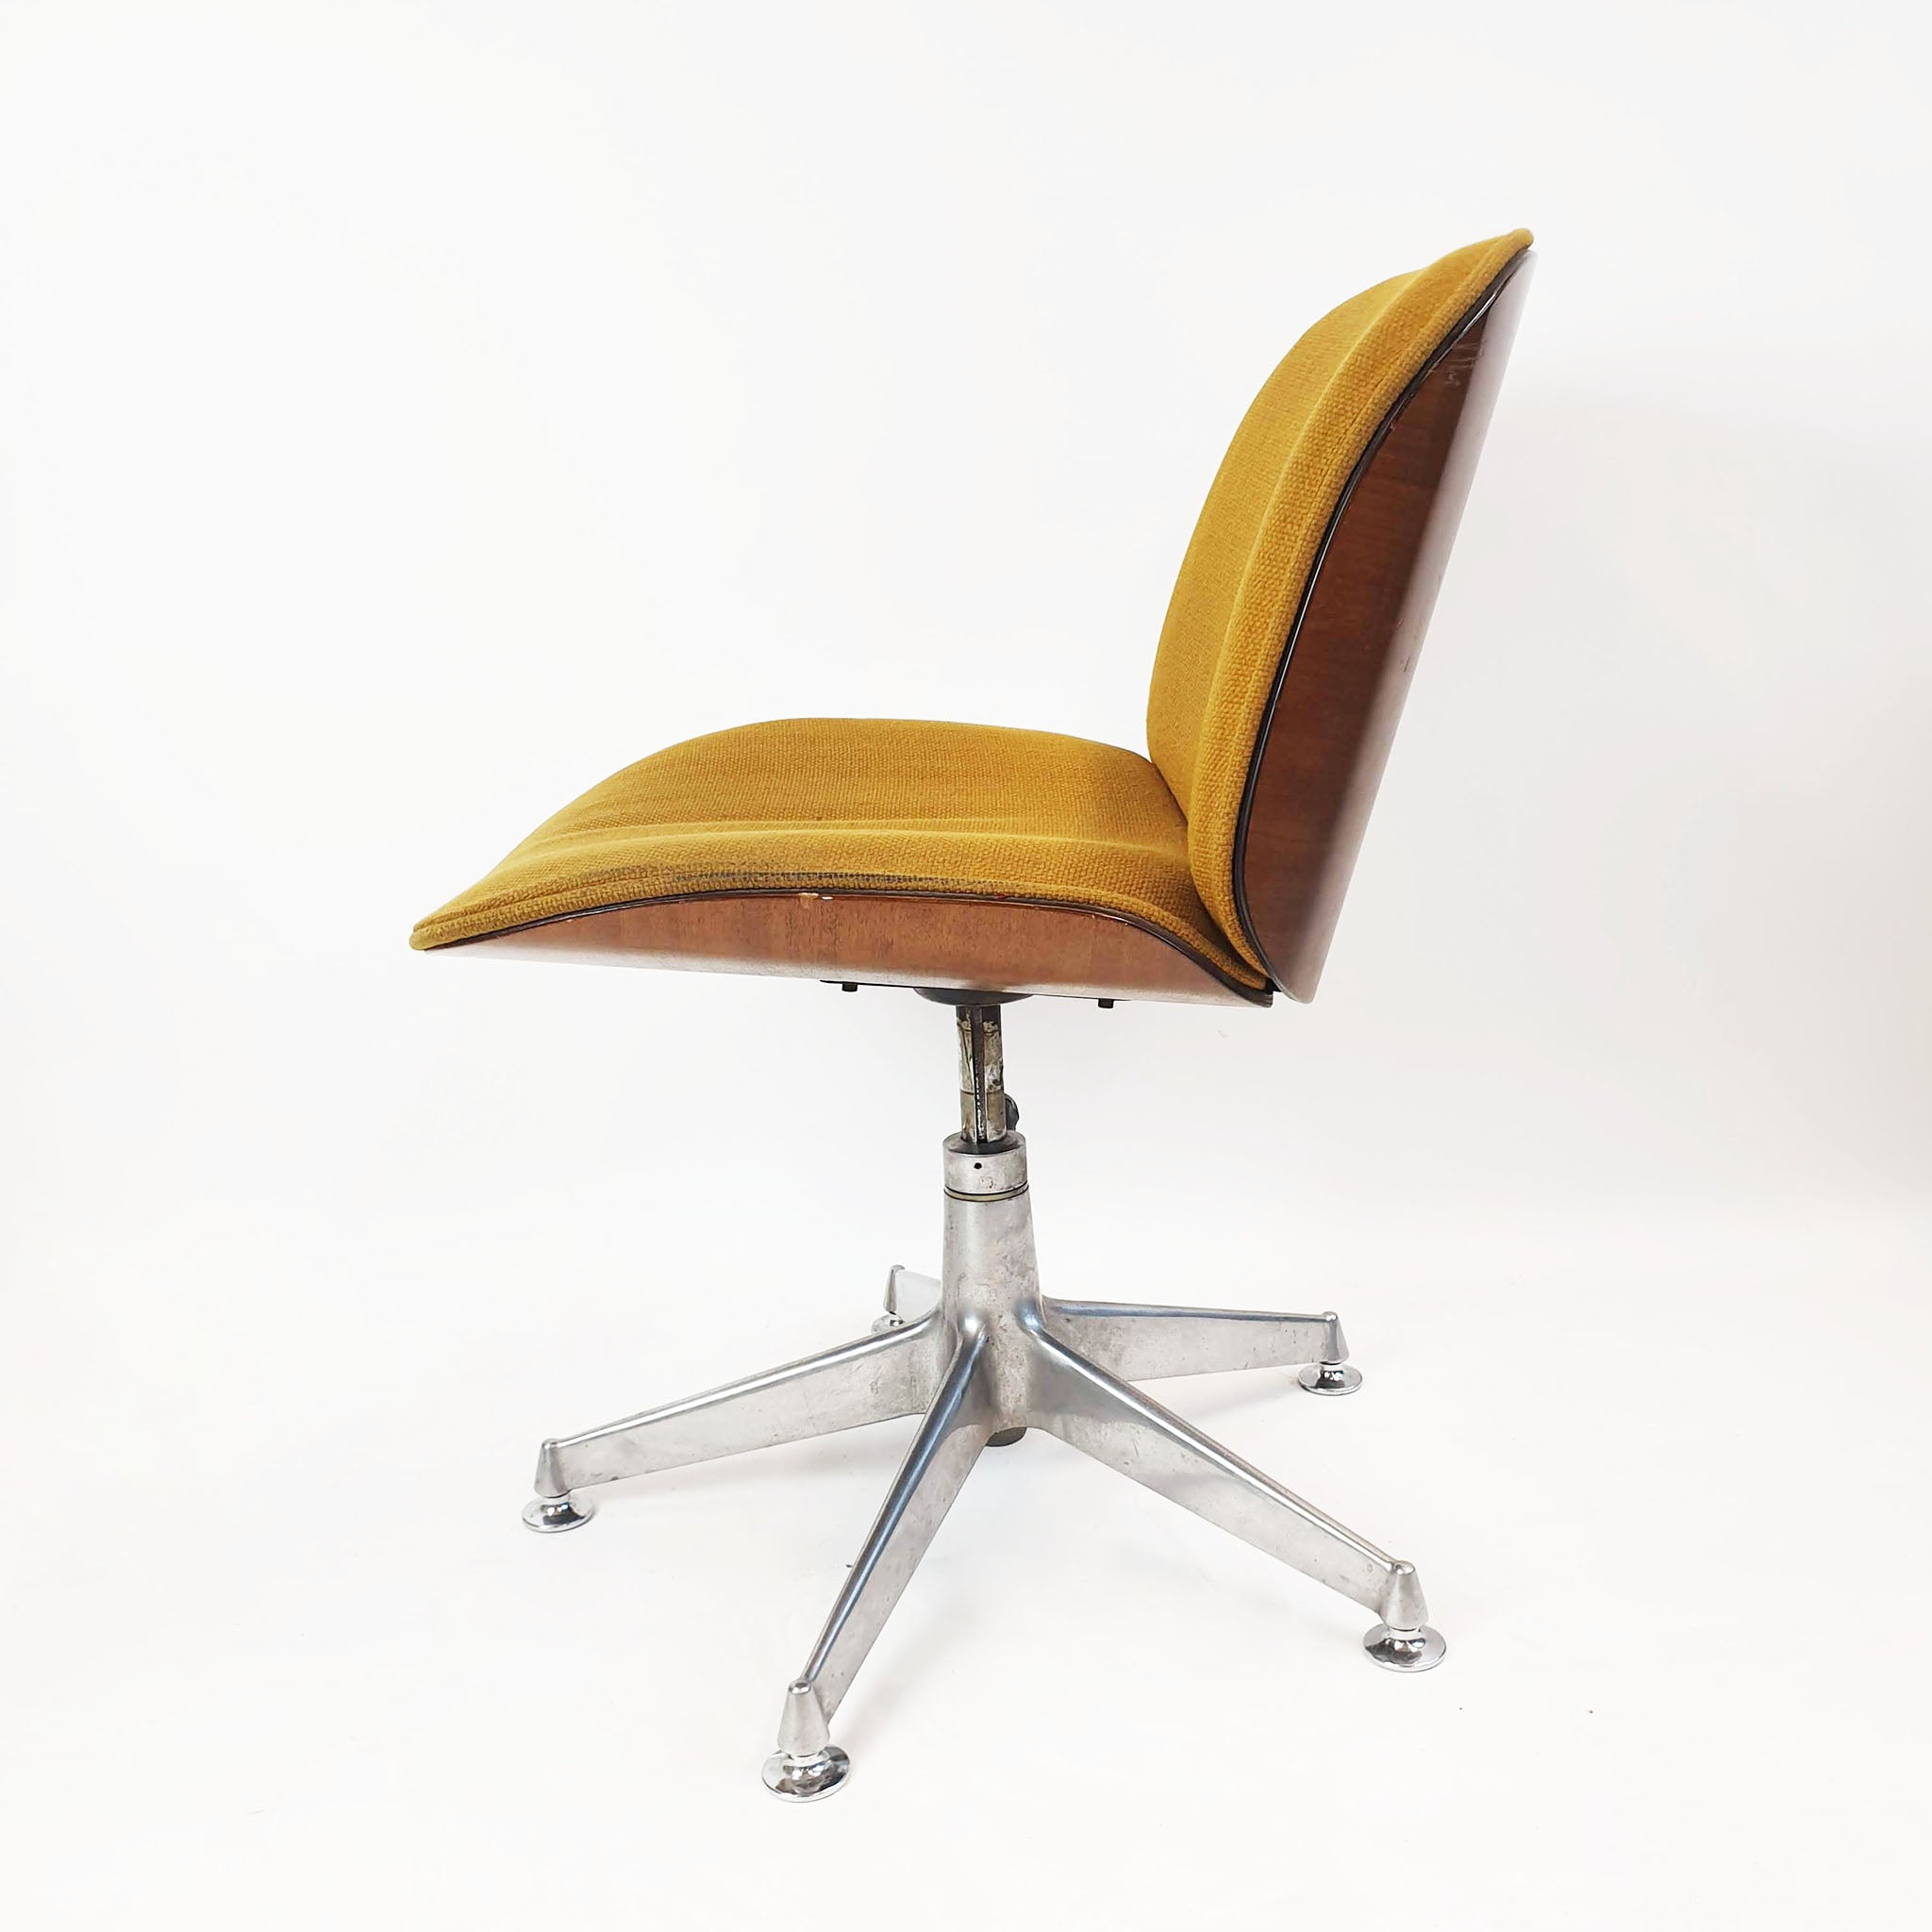 1960s office chair designed by Ico Parisi